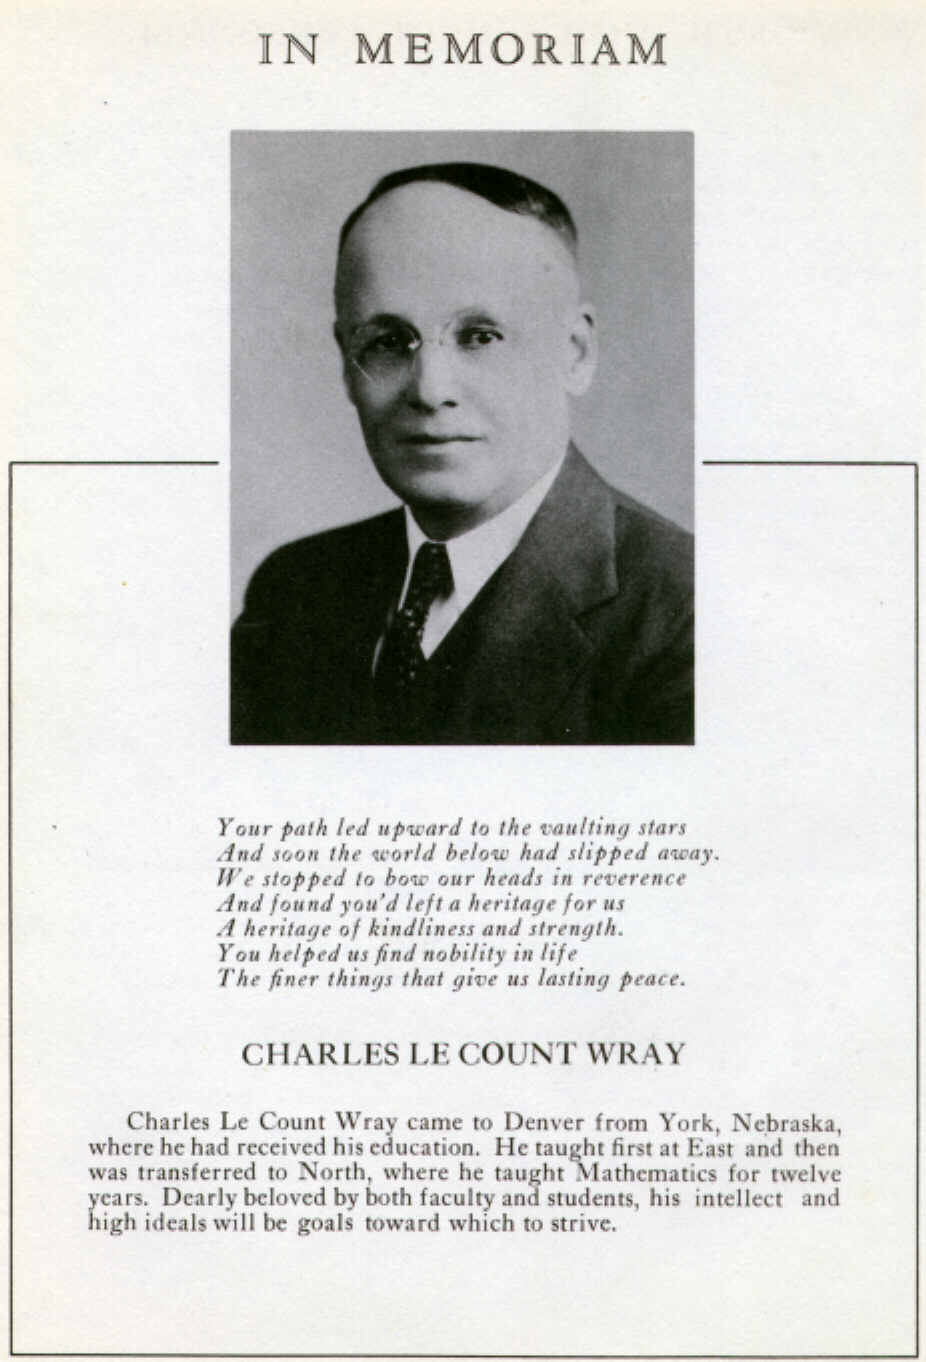 Charles Le Count Wray